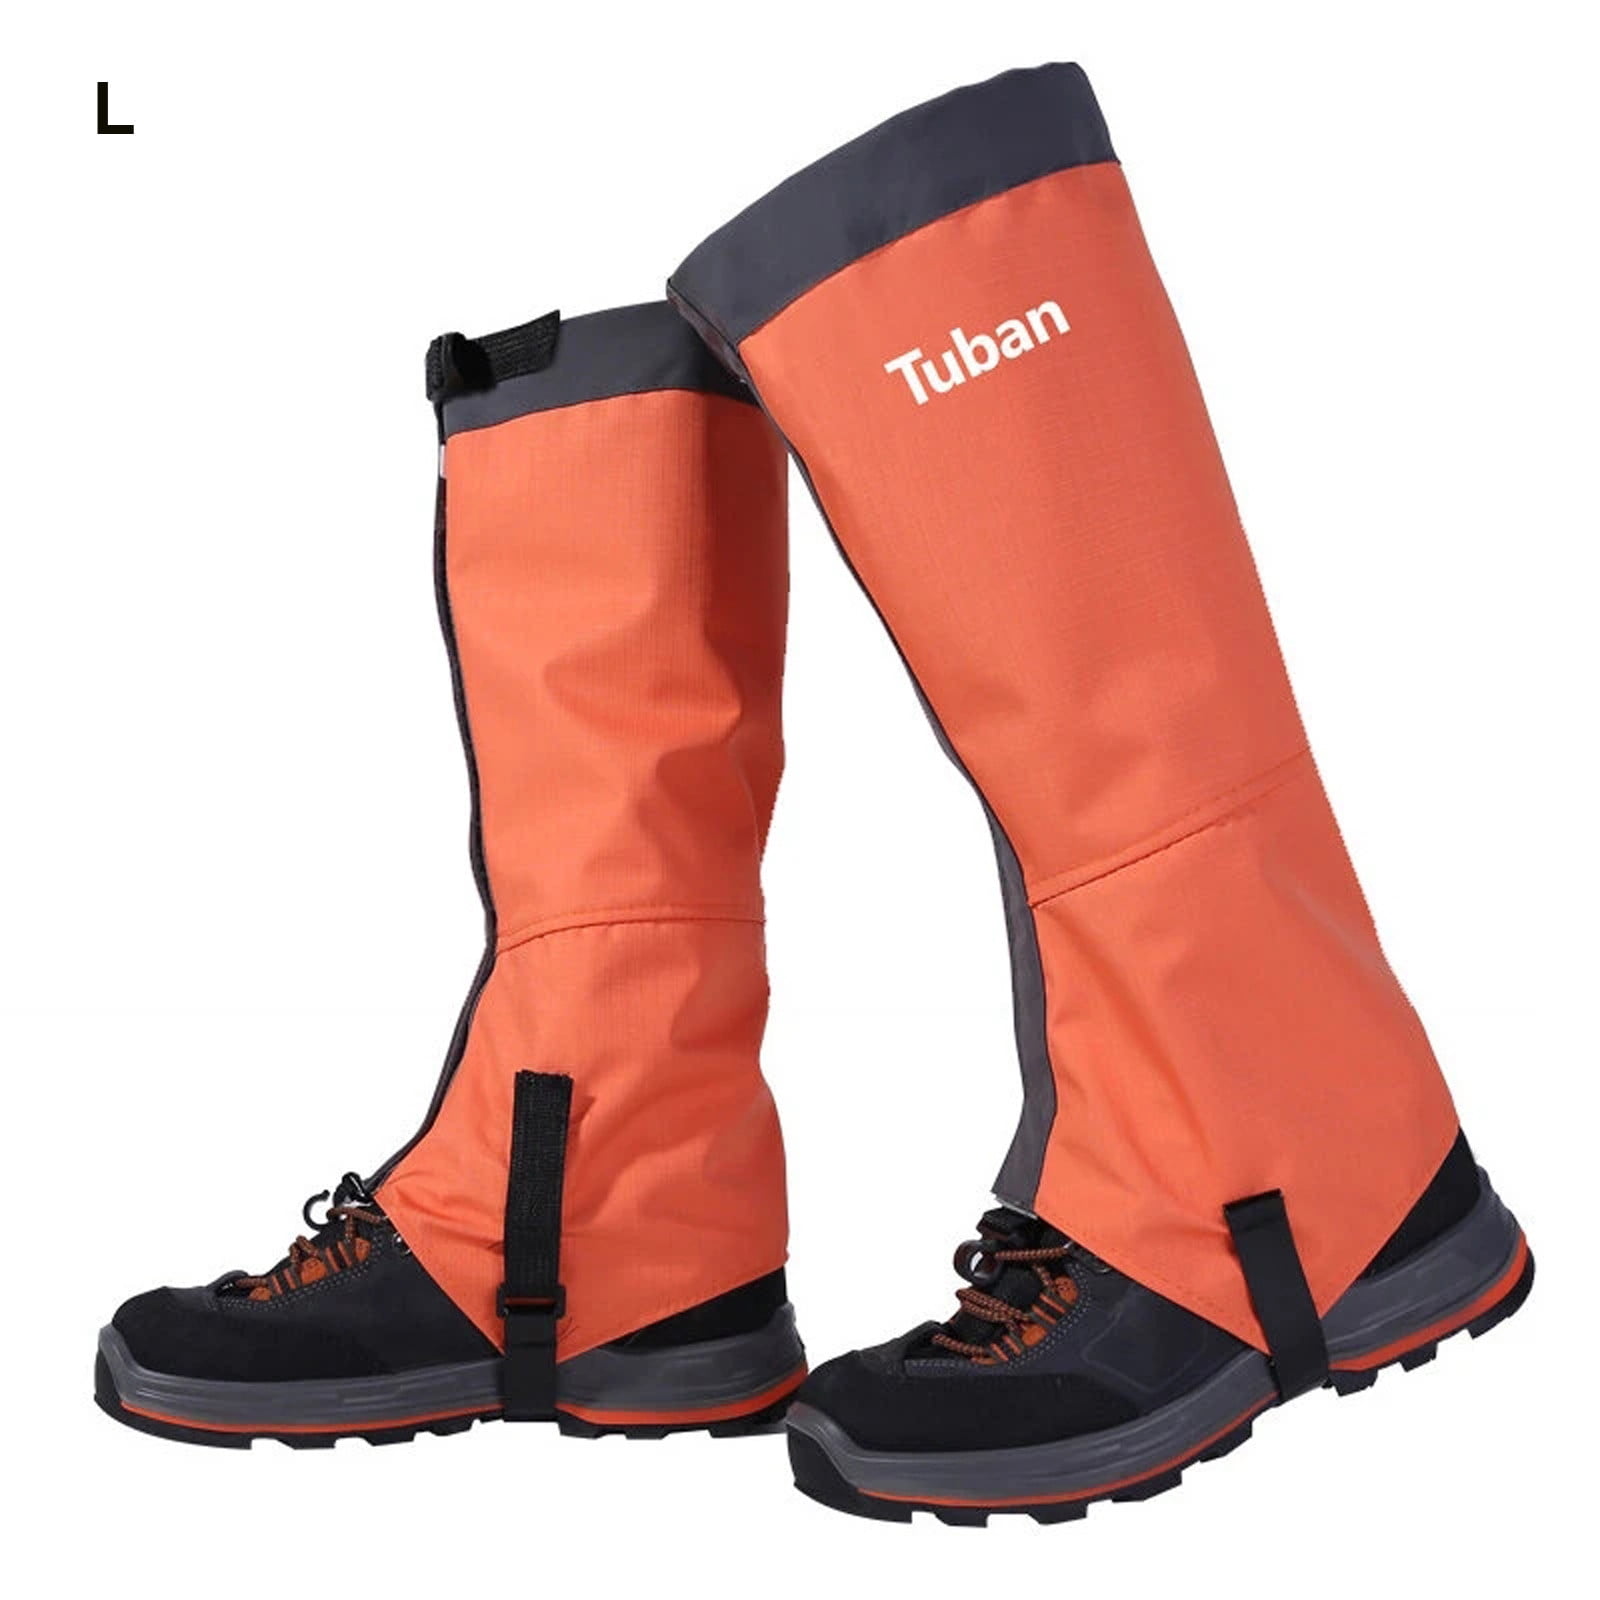 Skiing Boots Gaiters Shoe Cover Camping Hiking Boot on Clearance Orange ...